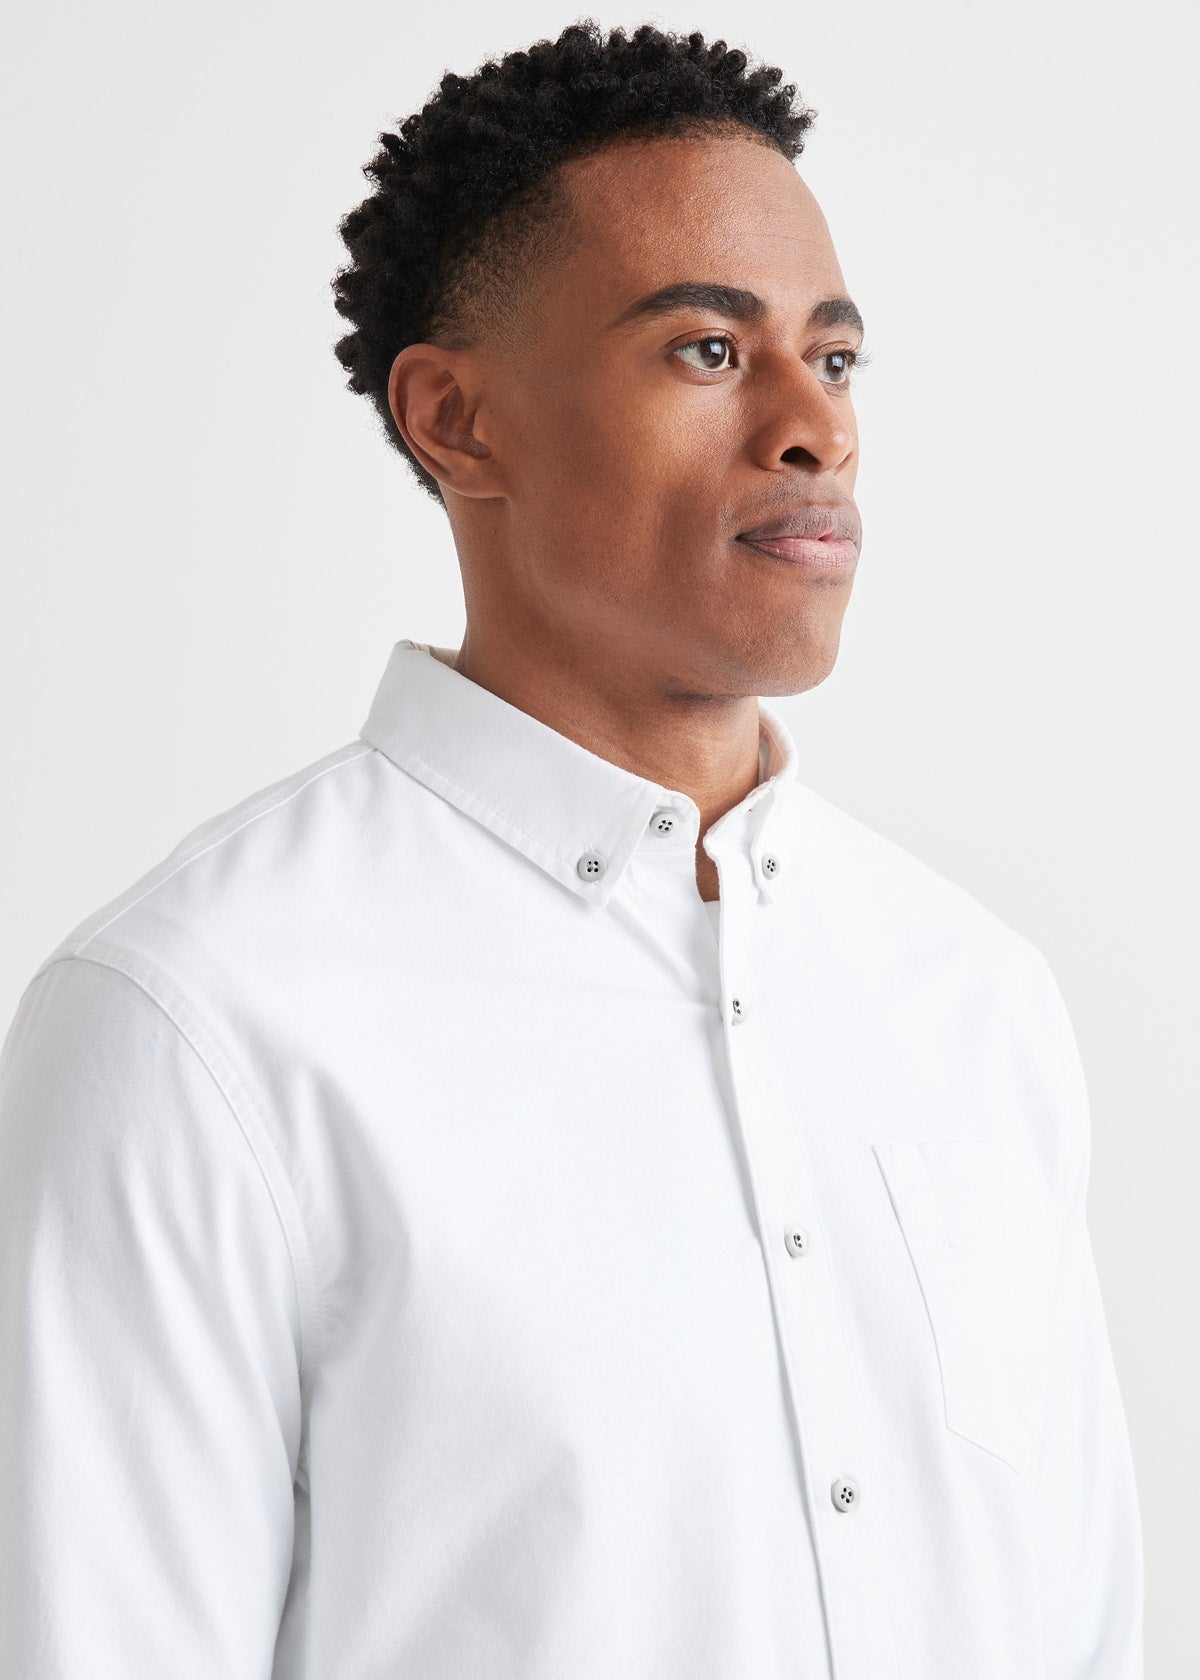 mens white stretch button down shirt front collar detail